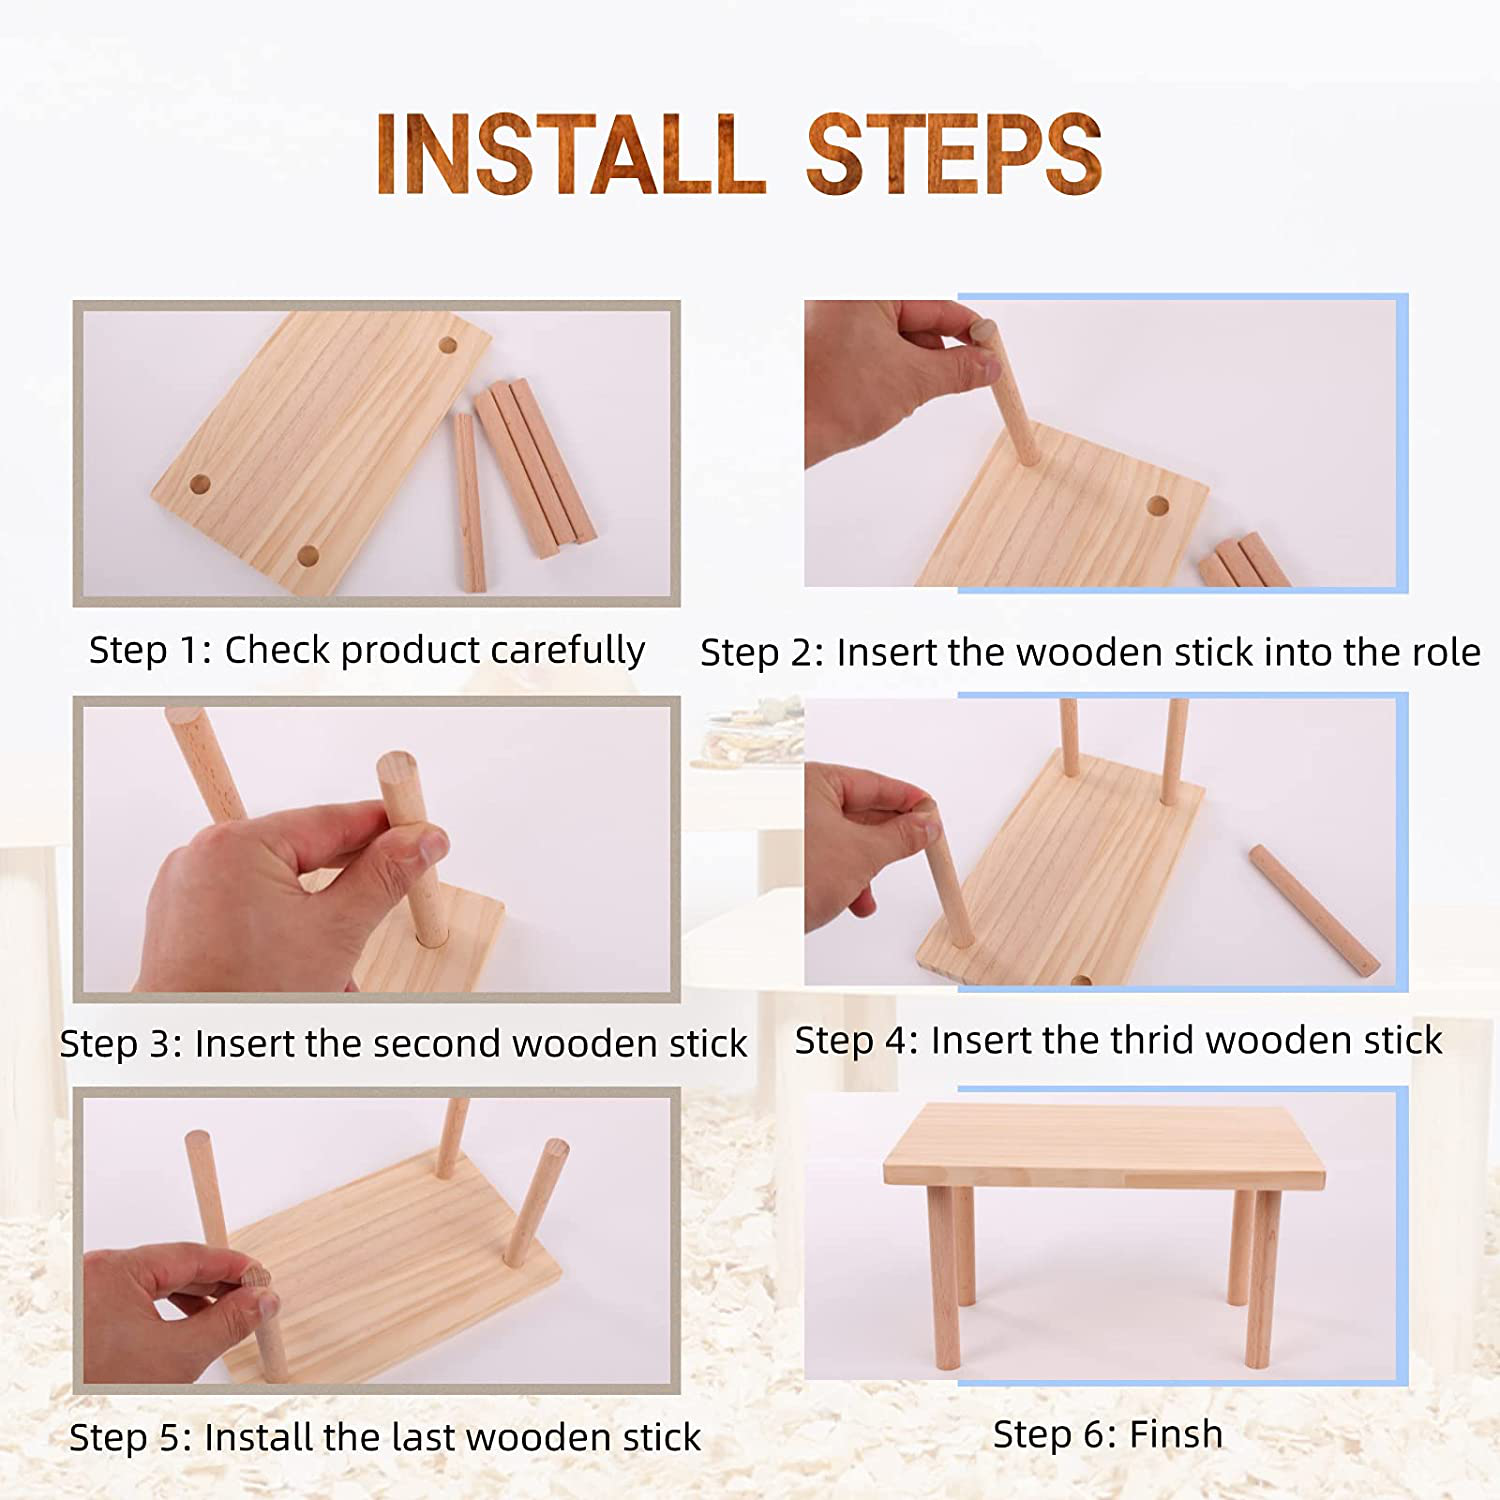 Hamster Play Wooden Platform, Natural Wood Desk for Small Animal Cage, Pet Bowl Drinking Bottle Stand